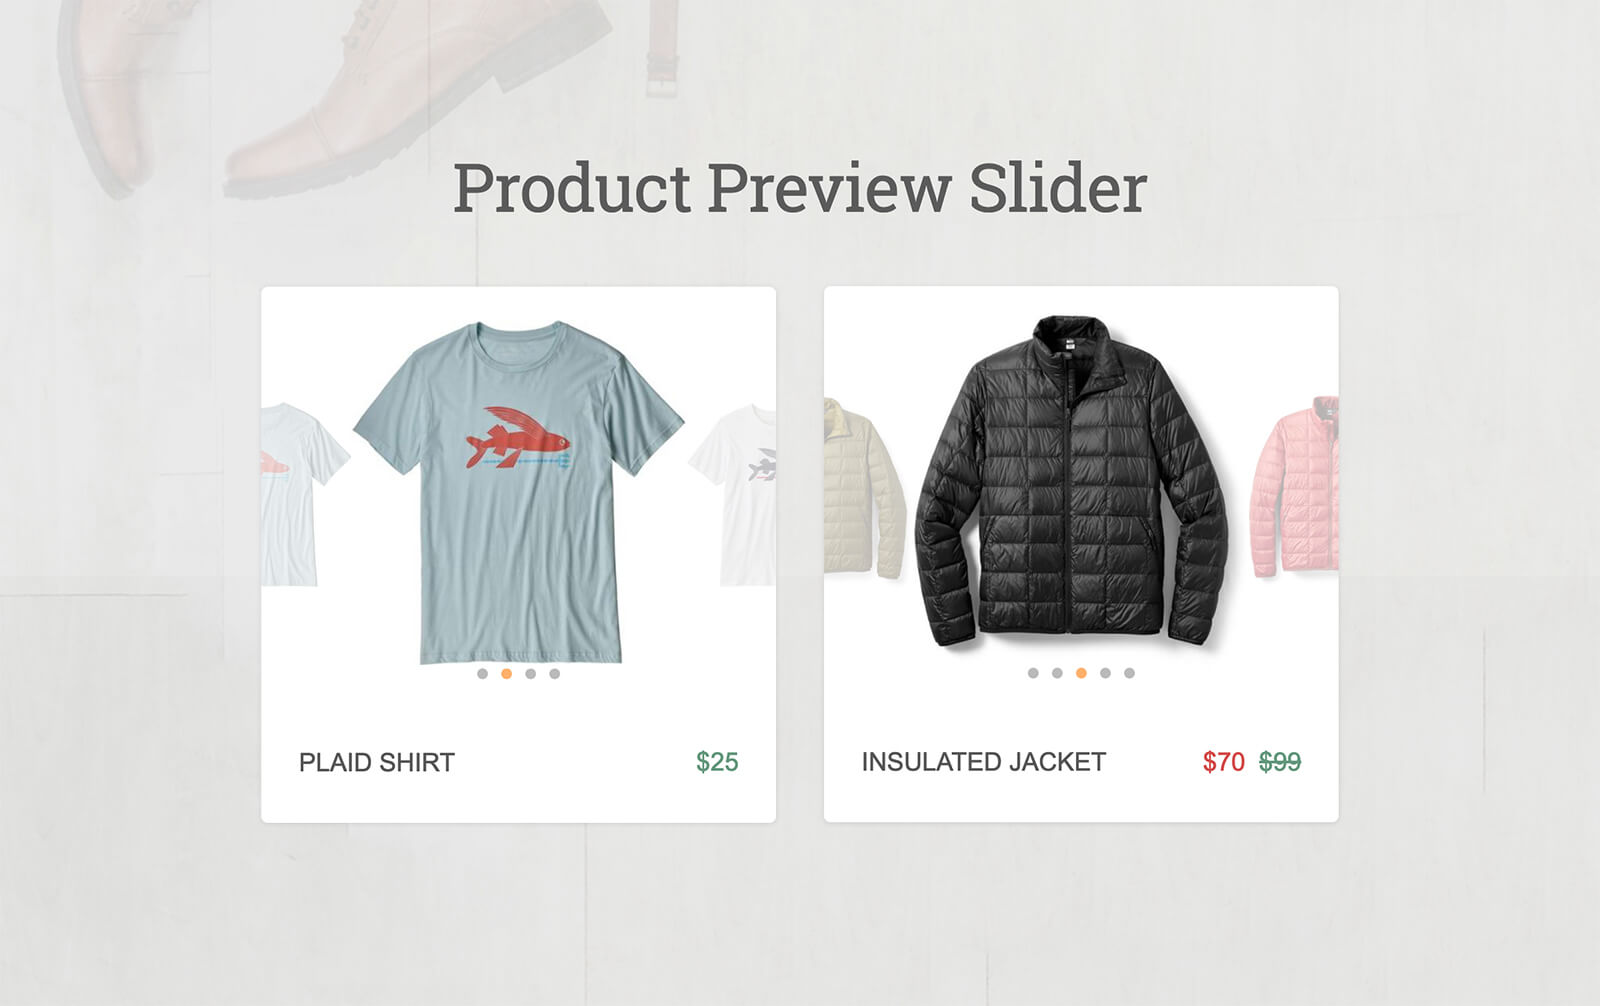 Product Preview Slider